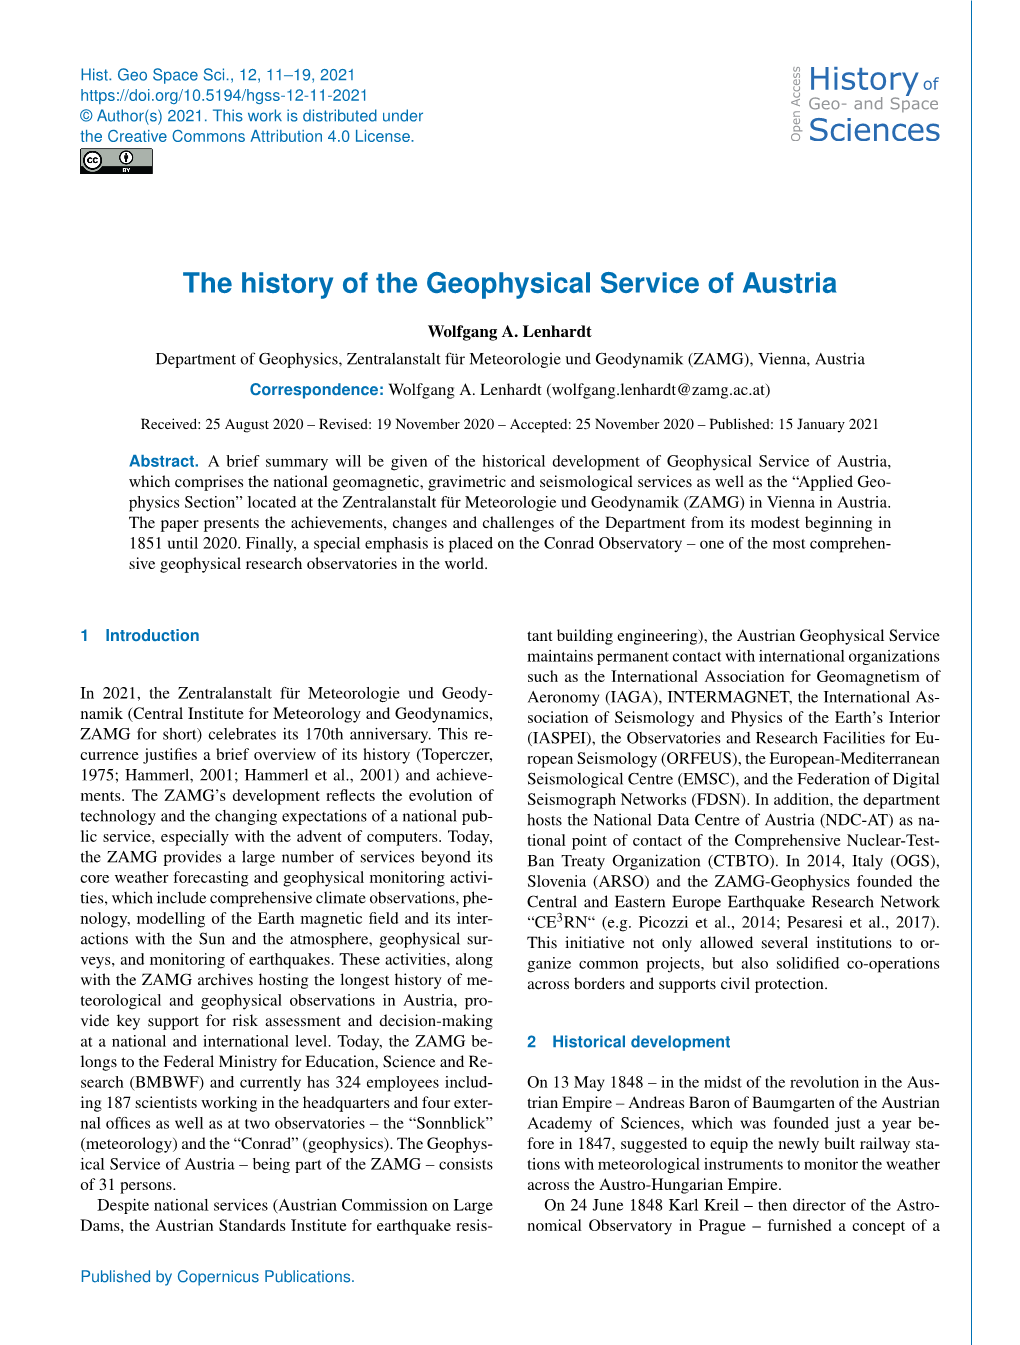 The History of the Geophysical Service of Austria